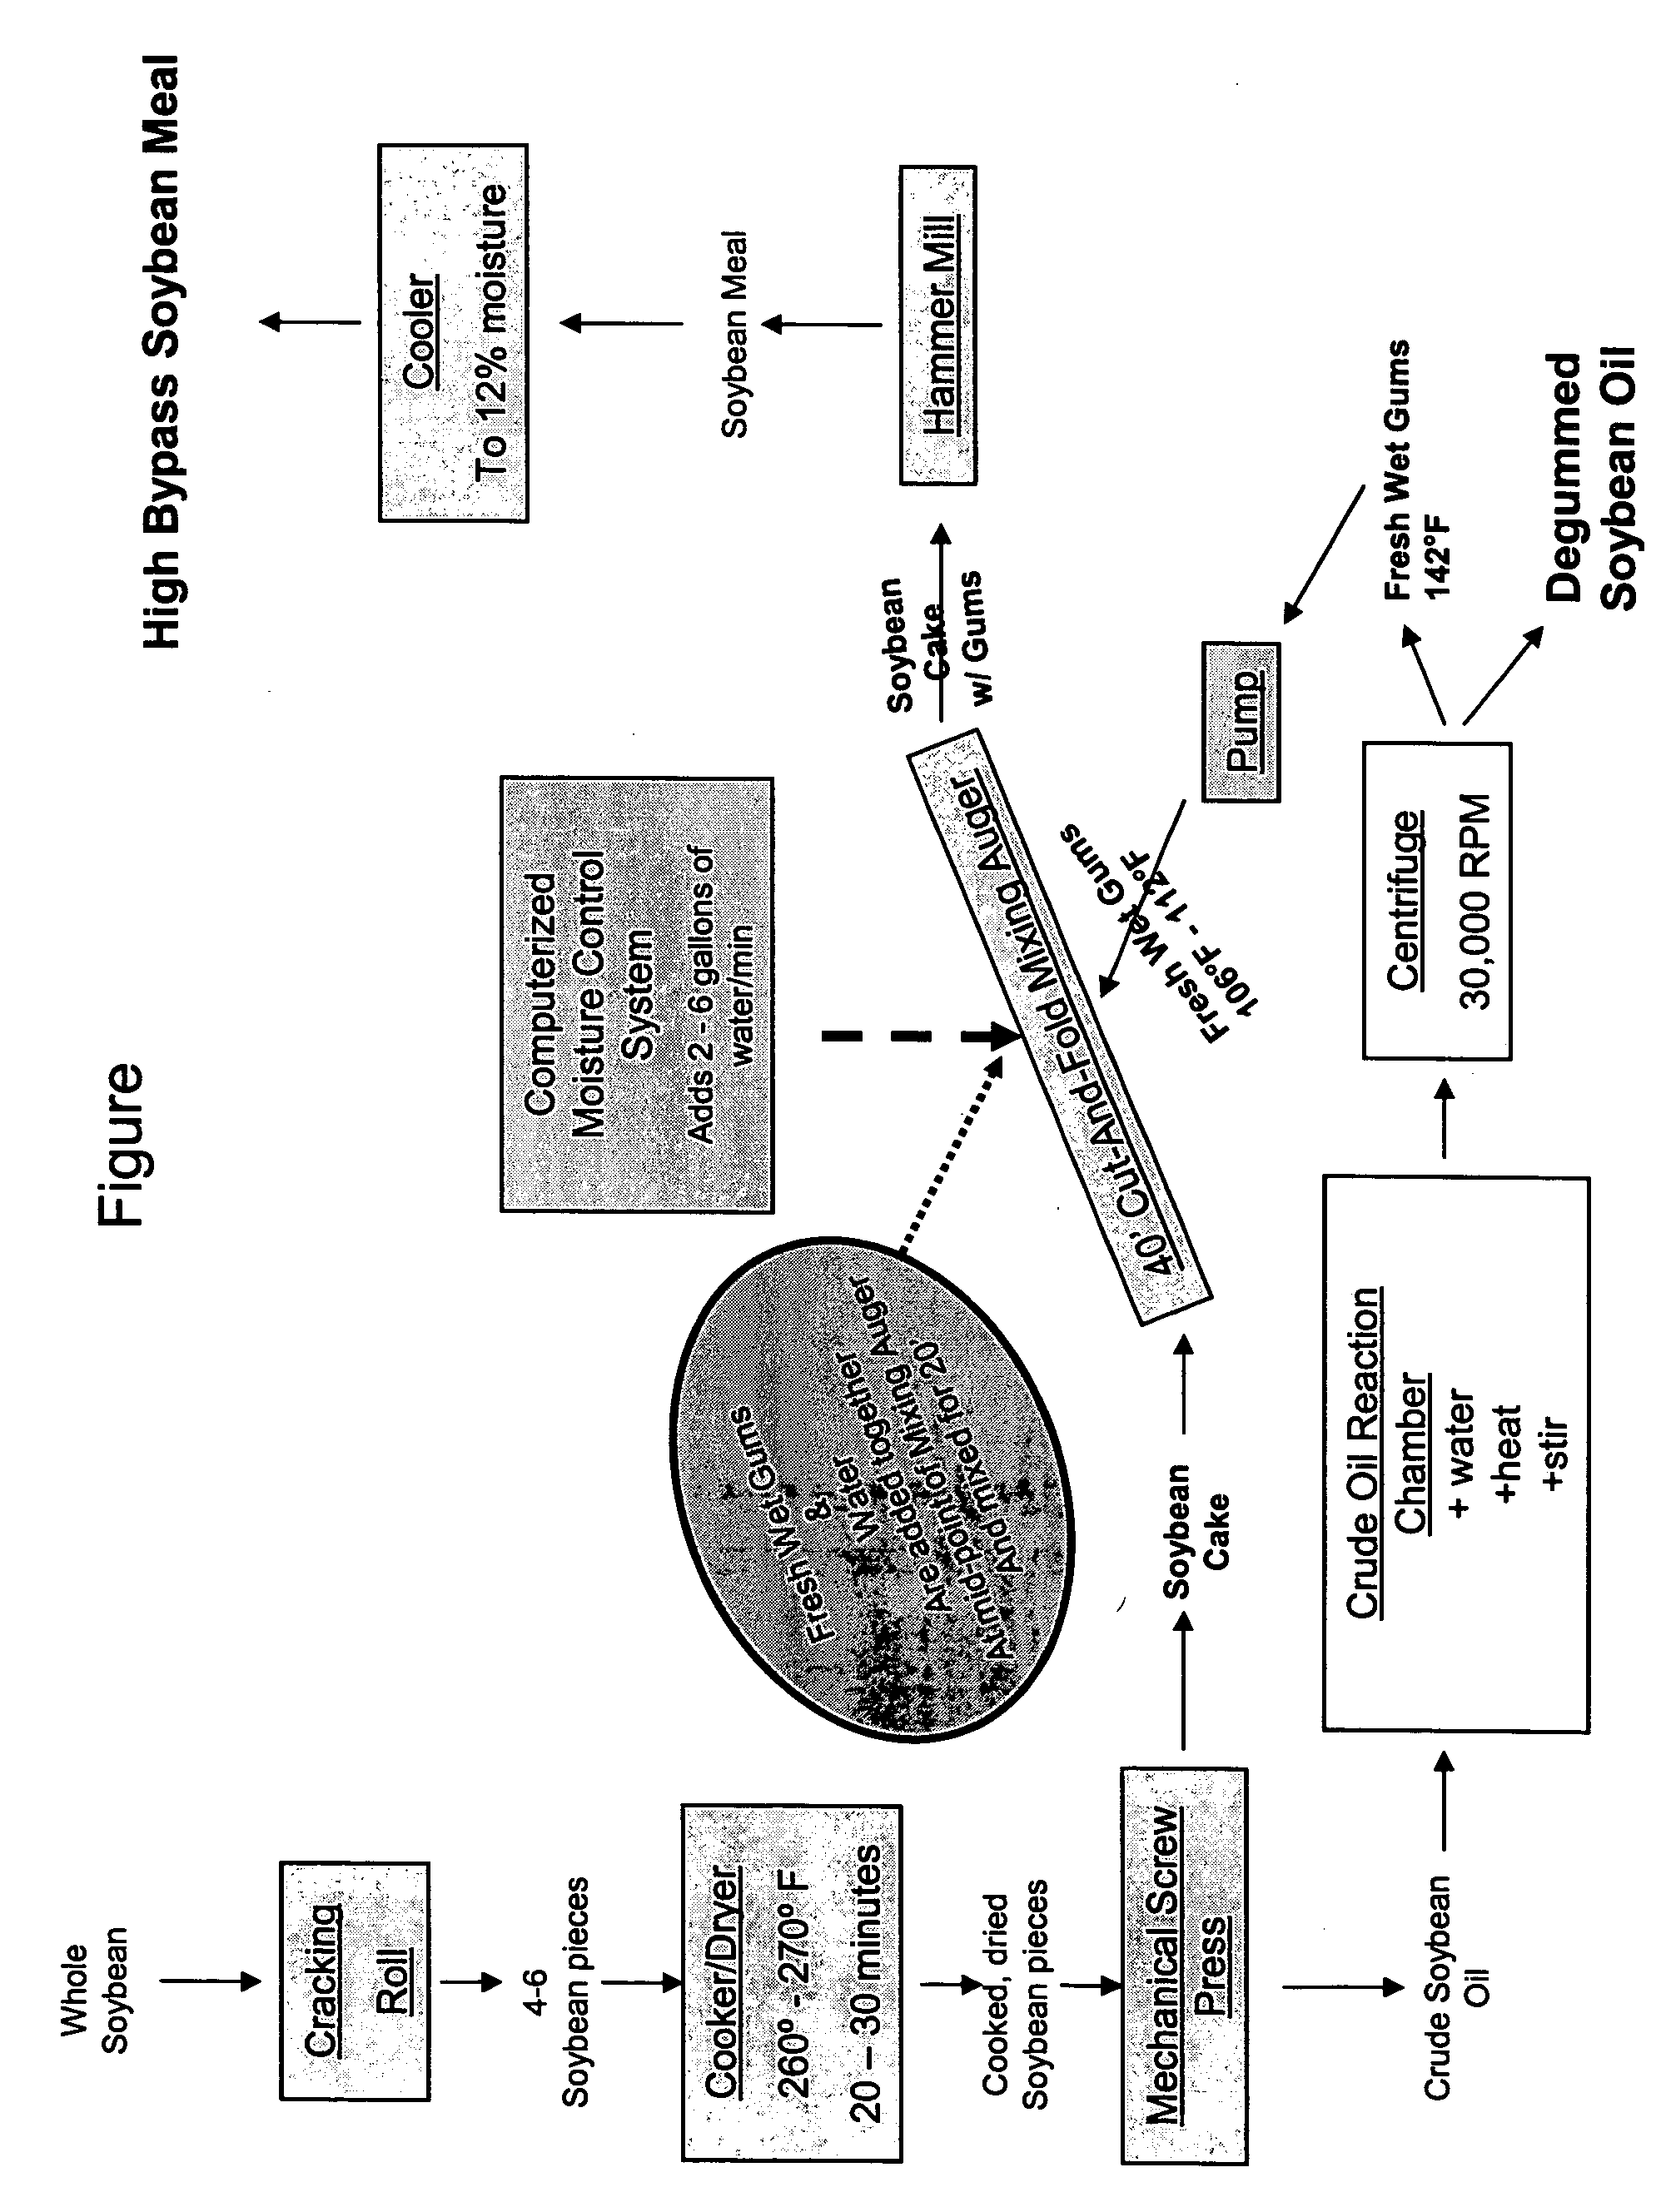 Method for manufacturing animal feed, method for increasing the rumen bypass capability of an animal feedstuff and animal feed